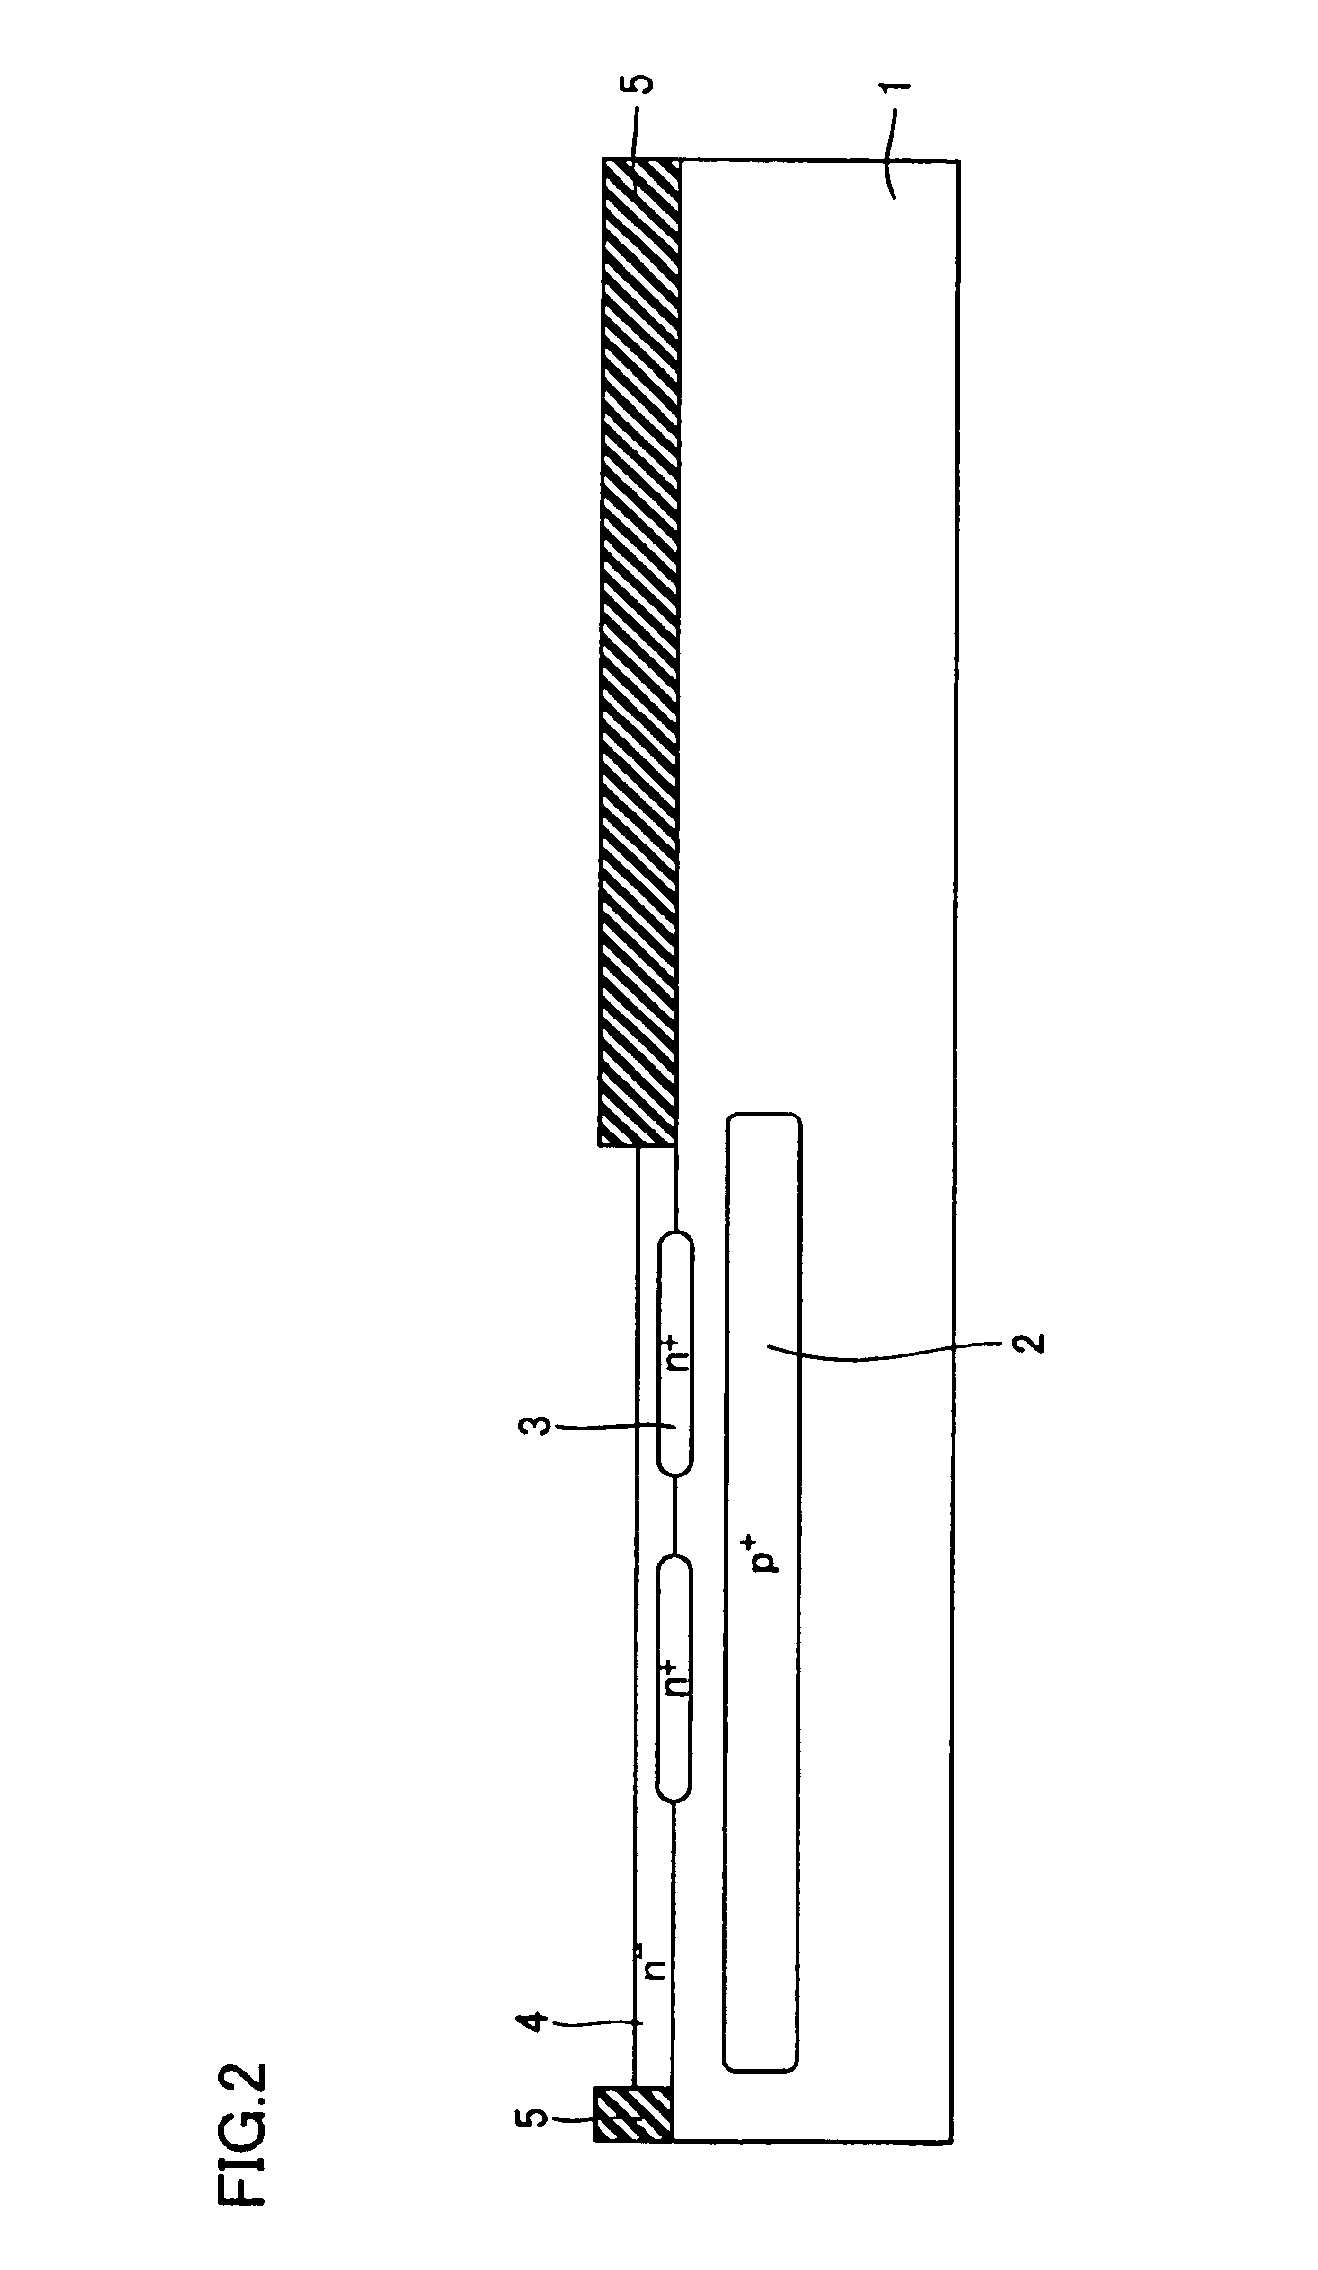 Semiconductor device including bipolar transistor and buried conductive region